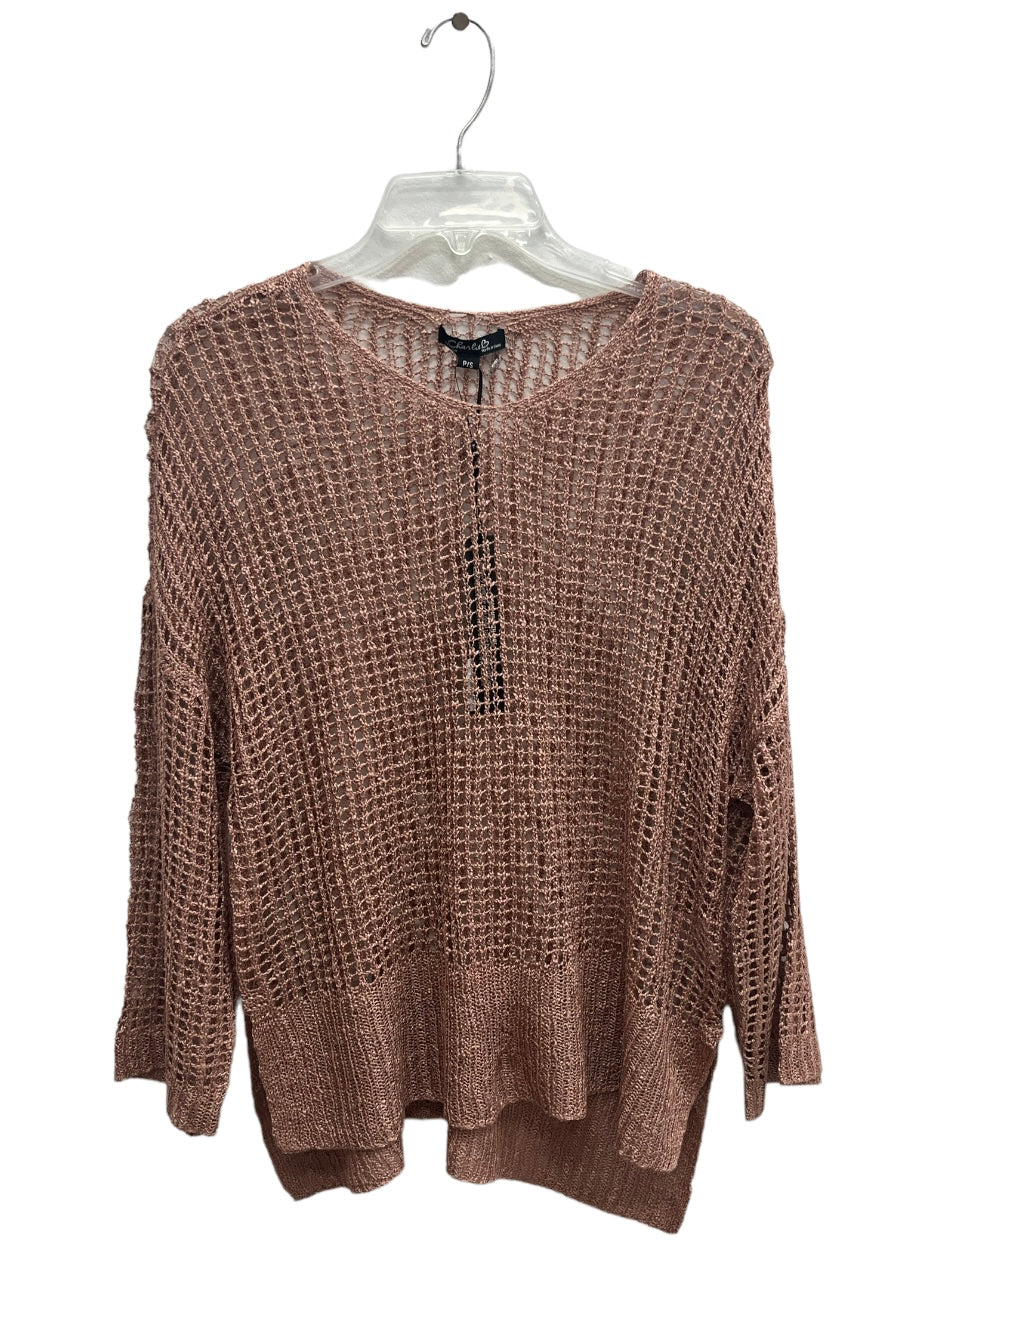 Knit long sleeve top